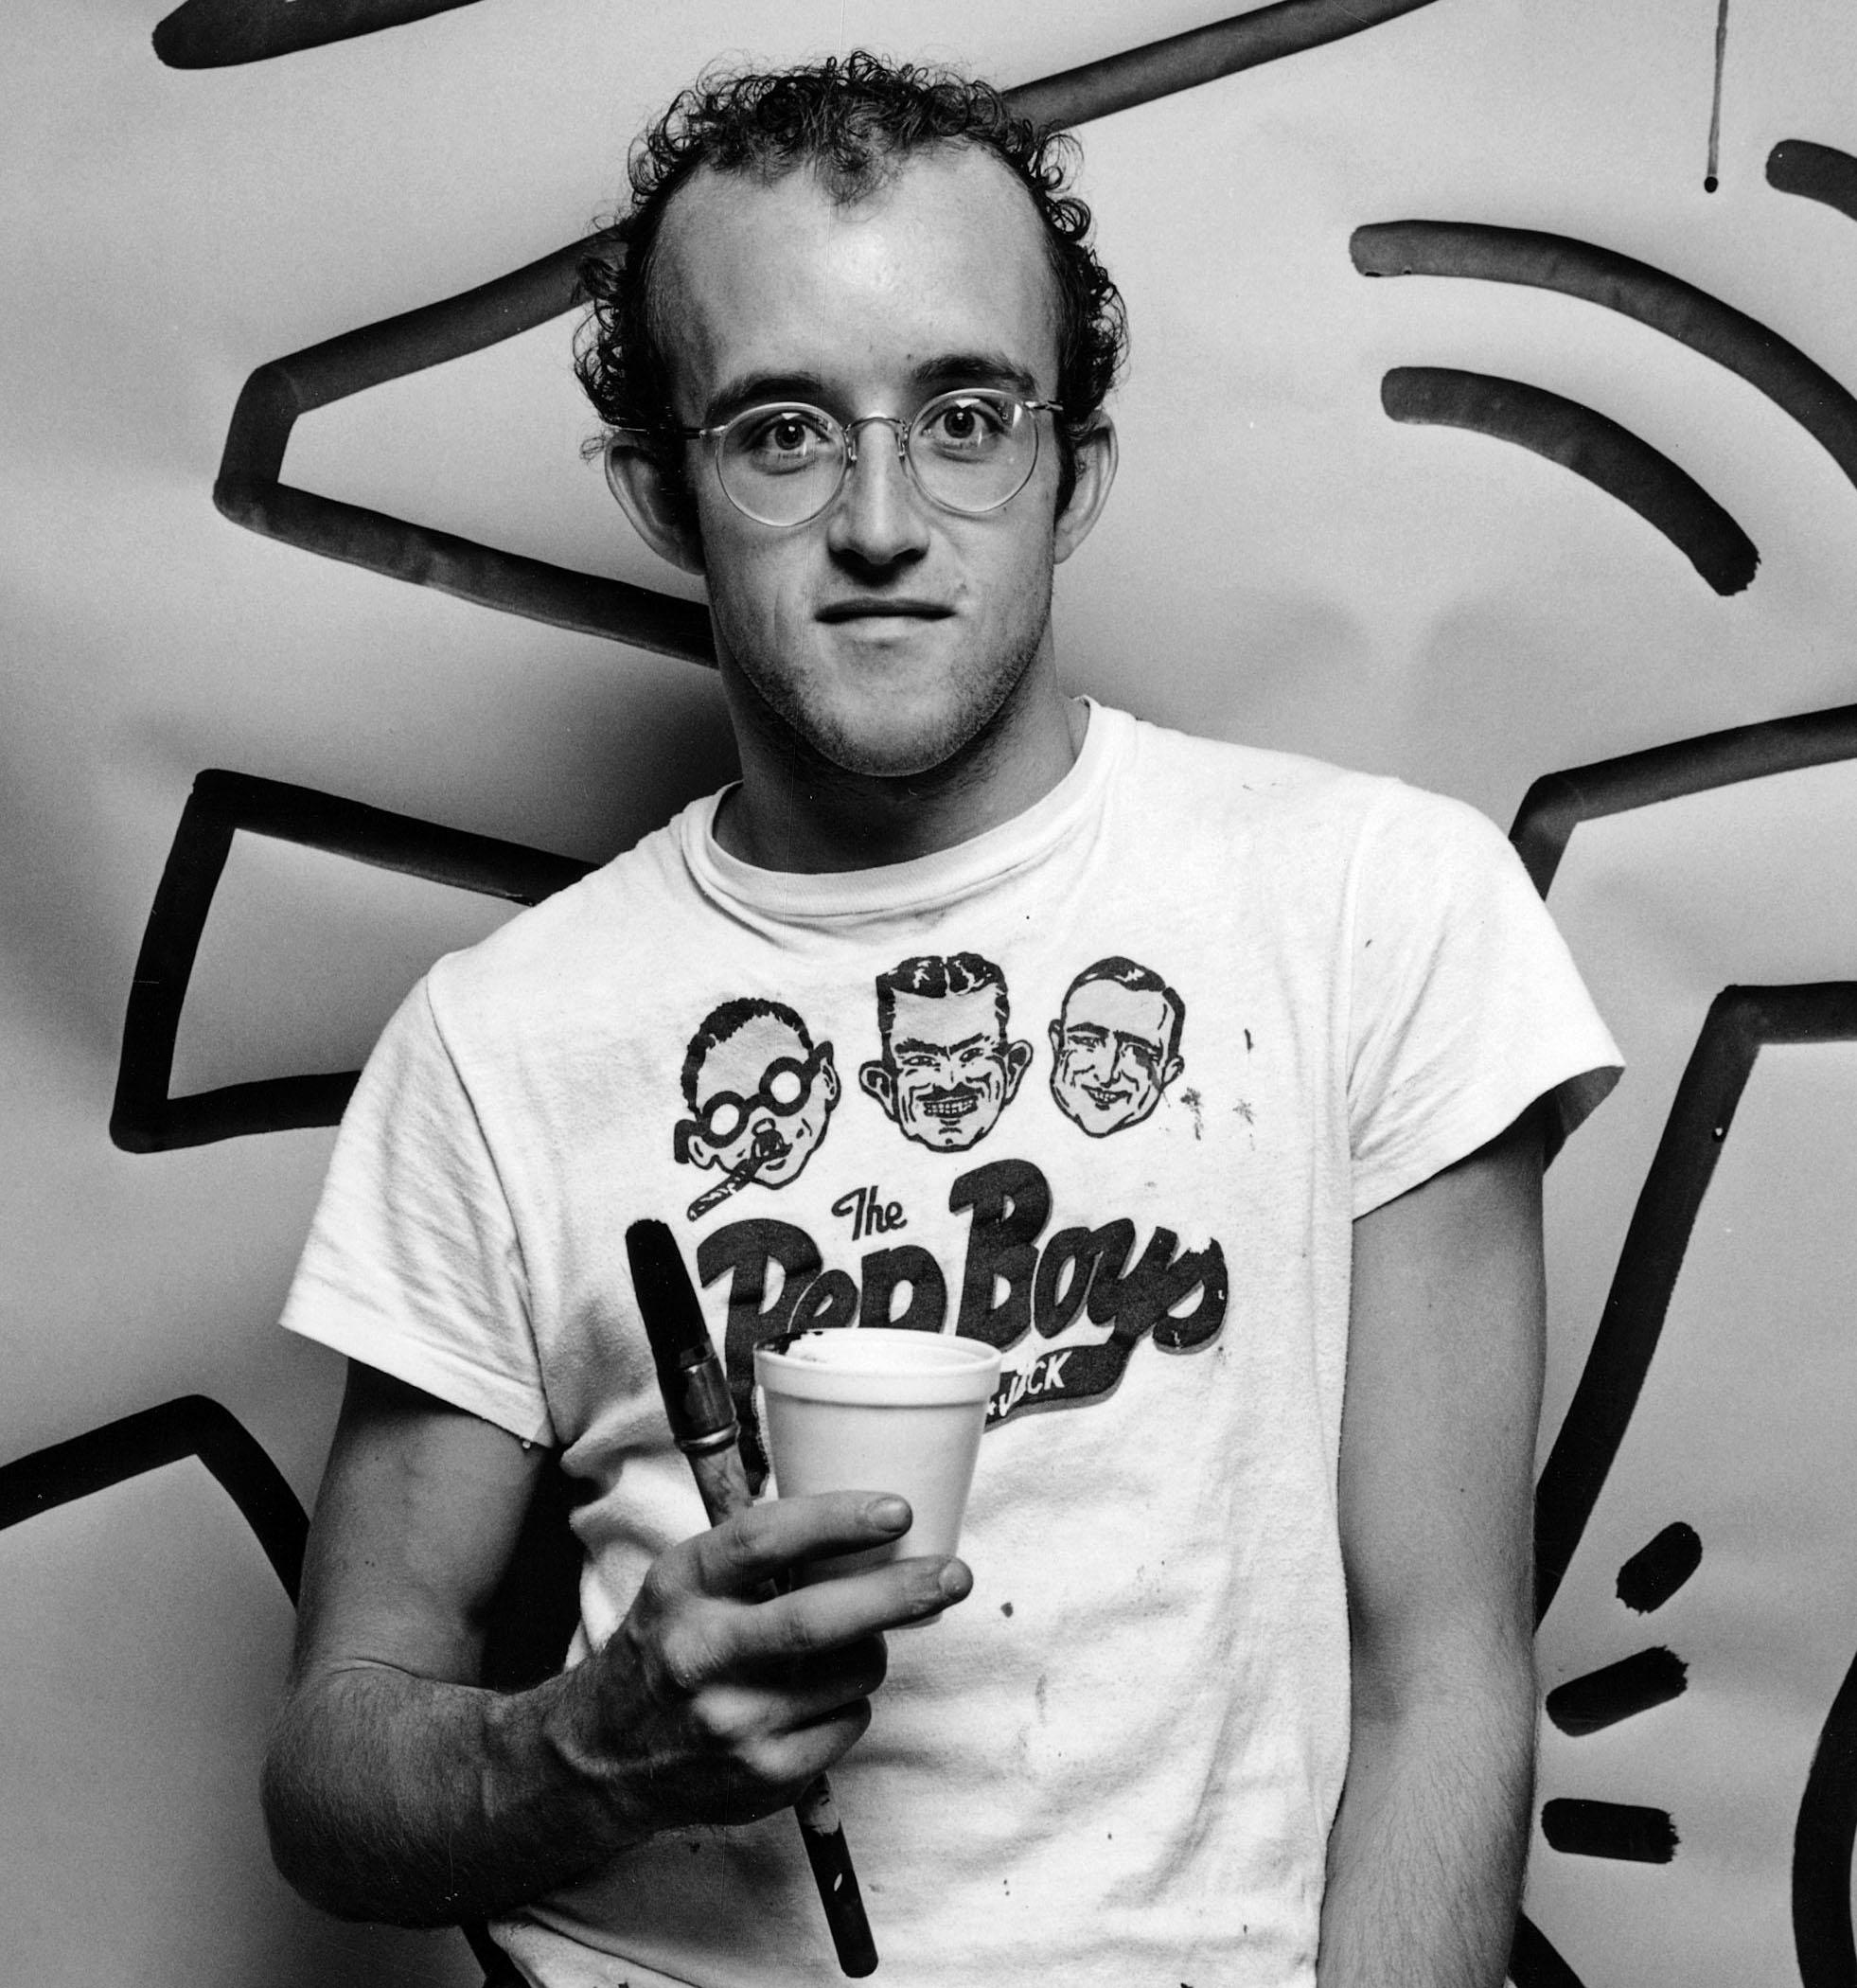  Graffiti artist Keith Haring with just completed work - Photograph by Jack Mitchell